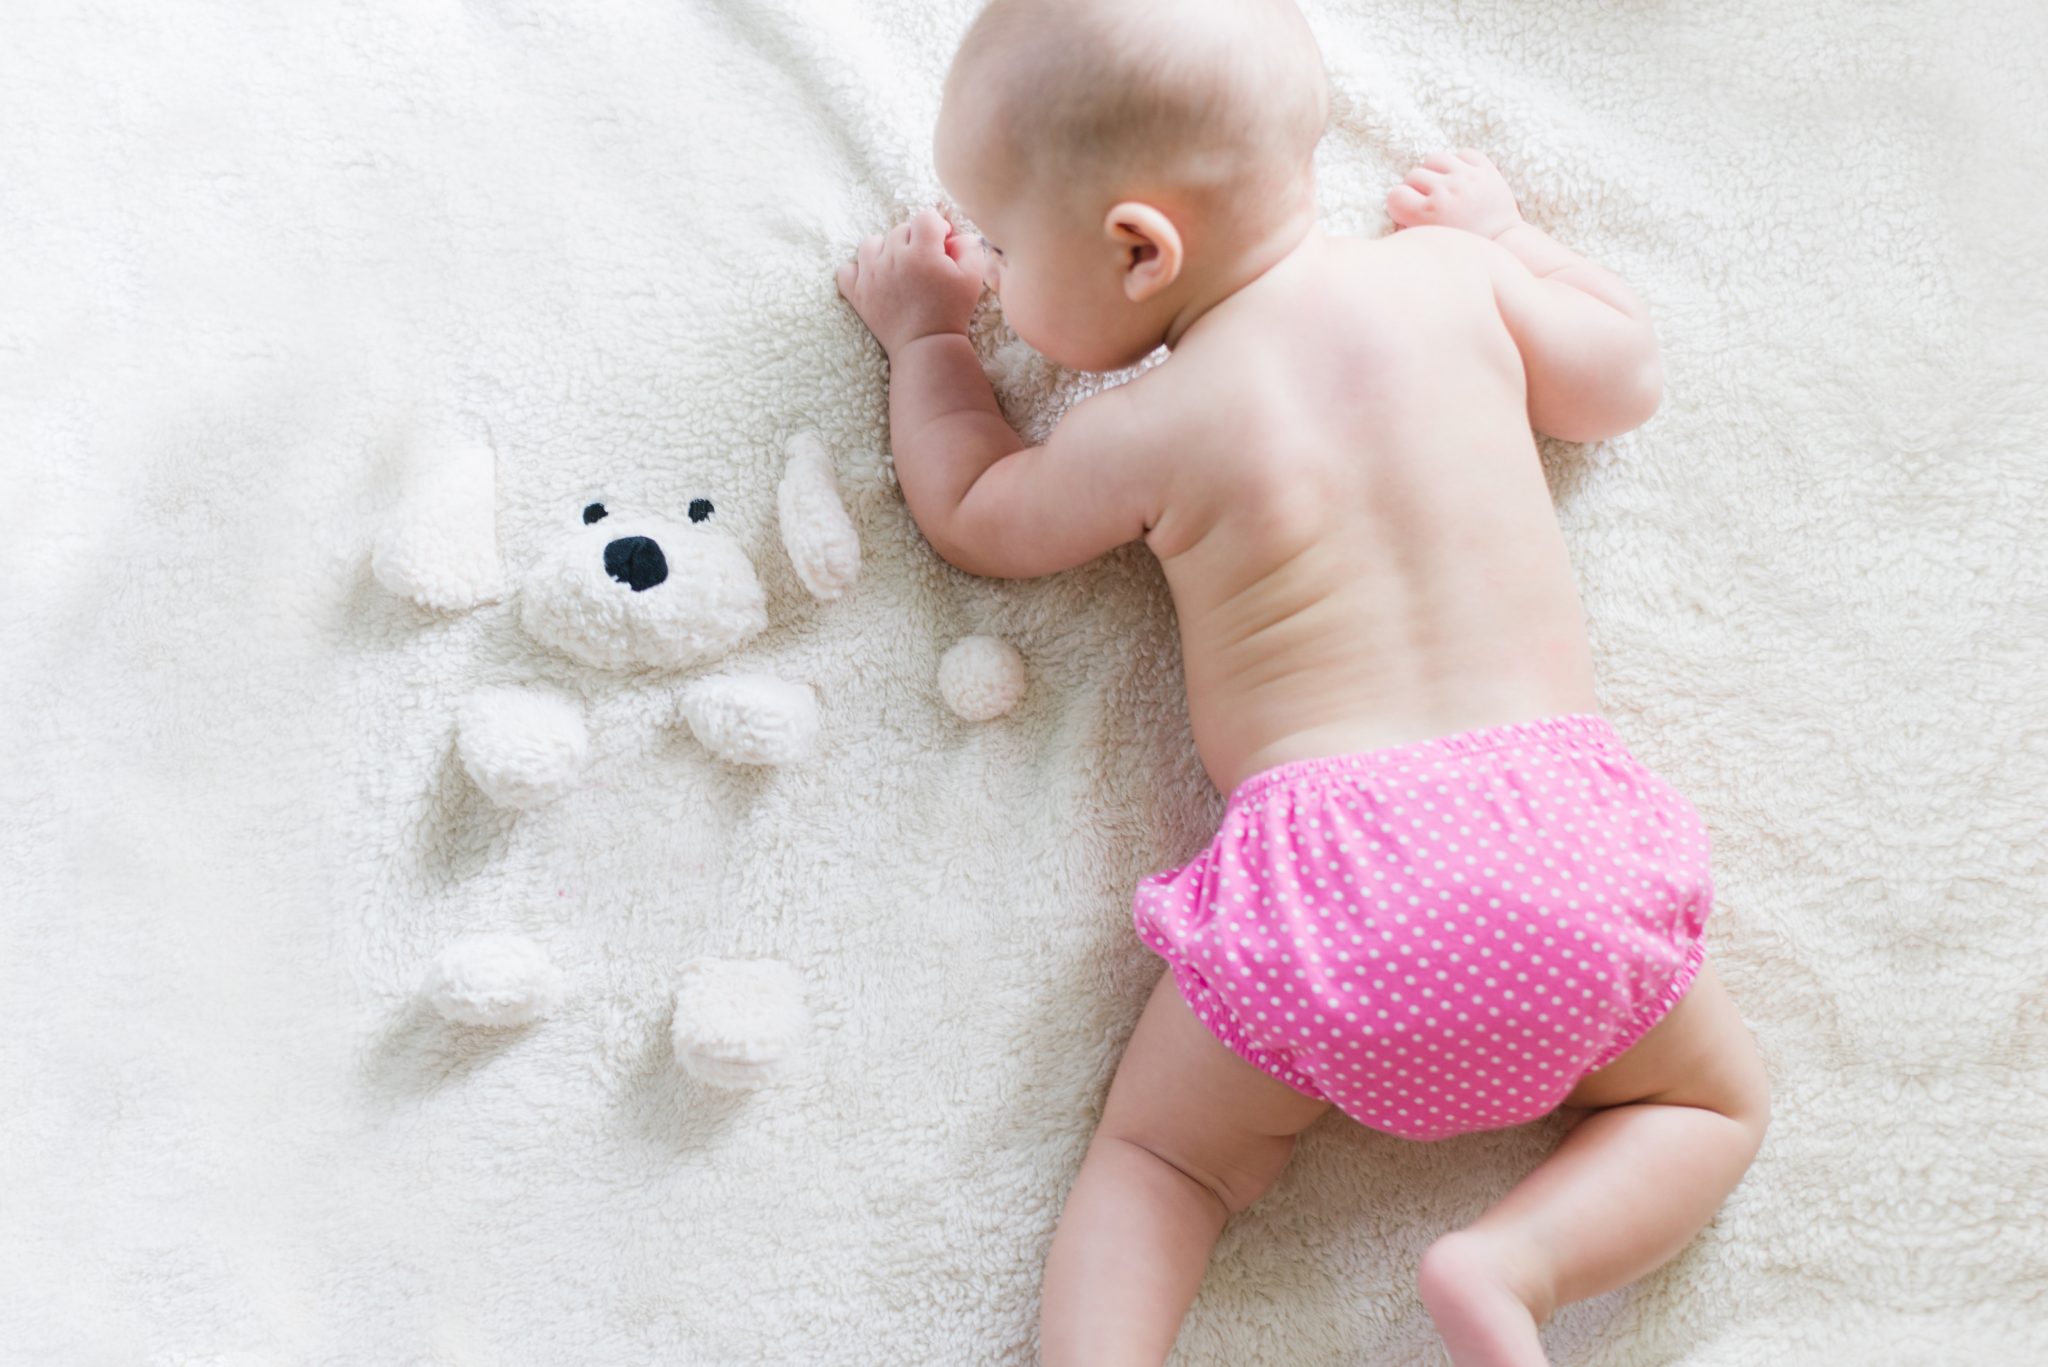 3 Reasons why you should switch to reusable cloth nappies